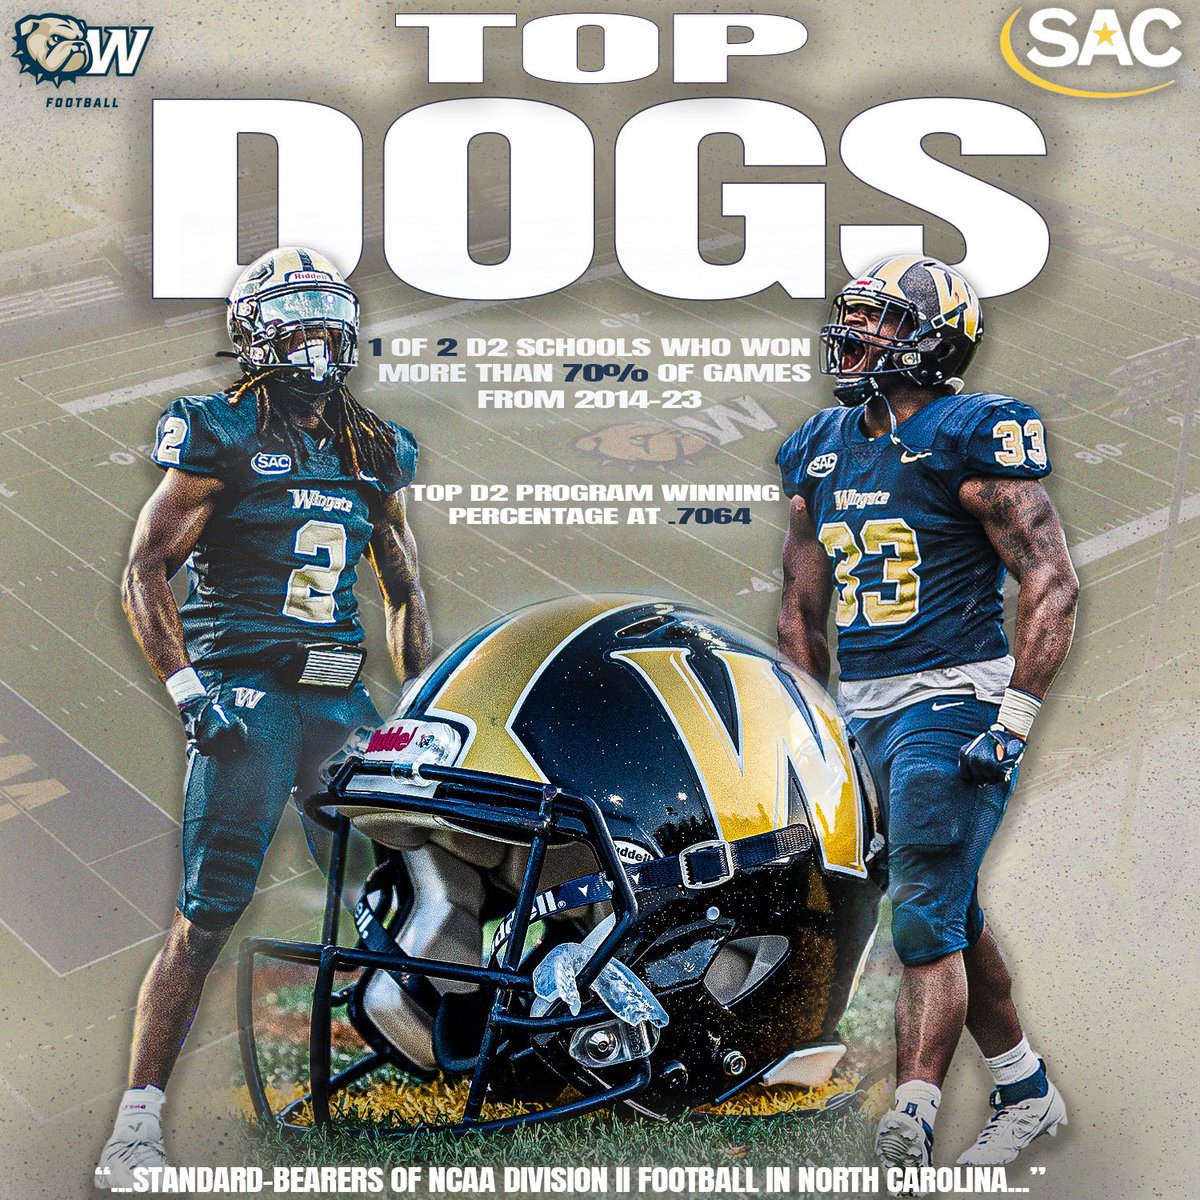 TOP DOGS 😤 NC Football News came out with an article that highlighted the success of Wingate Football. “…standard-bearers of NCAA Division II football in North Carolina...” Excellence is the standard here at Wingate! #OneDog ncfootballnews.com/10-year-rewind…